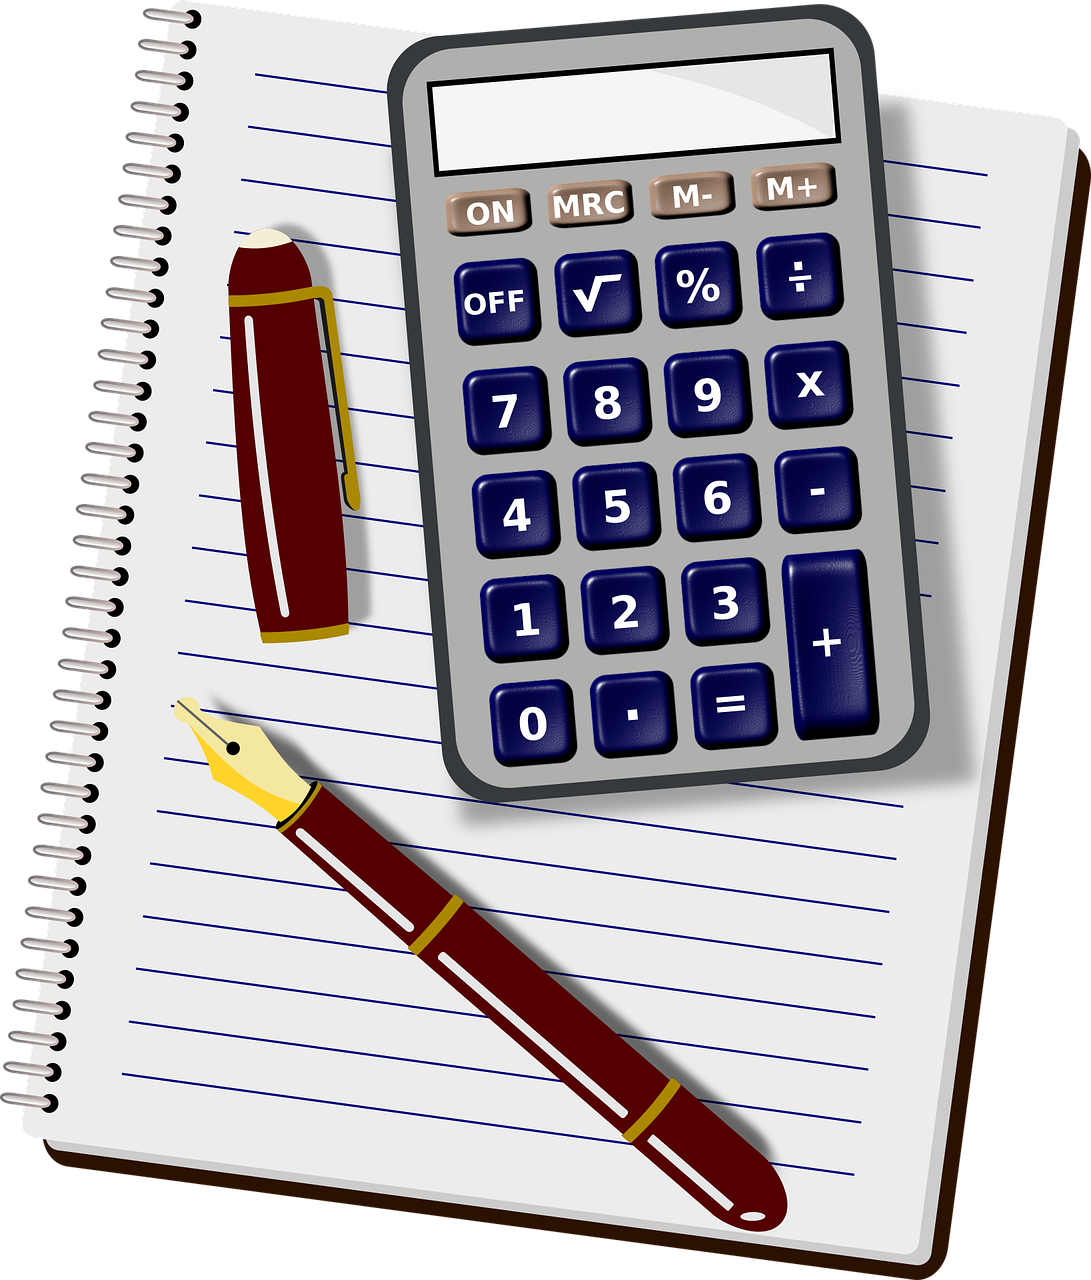 Auto Loan Amortization Calculators You Can Use Online